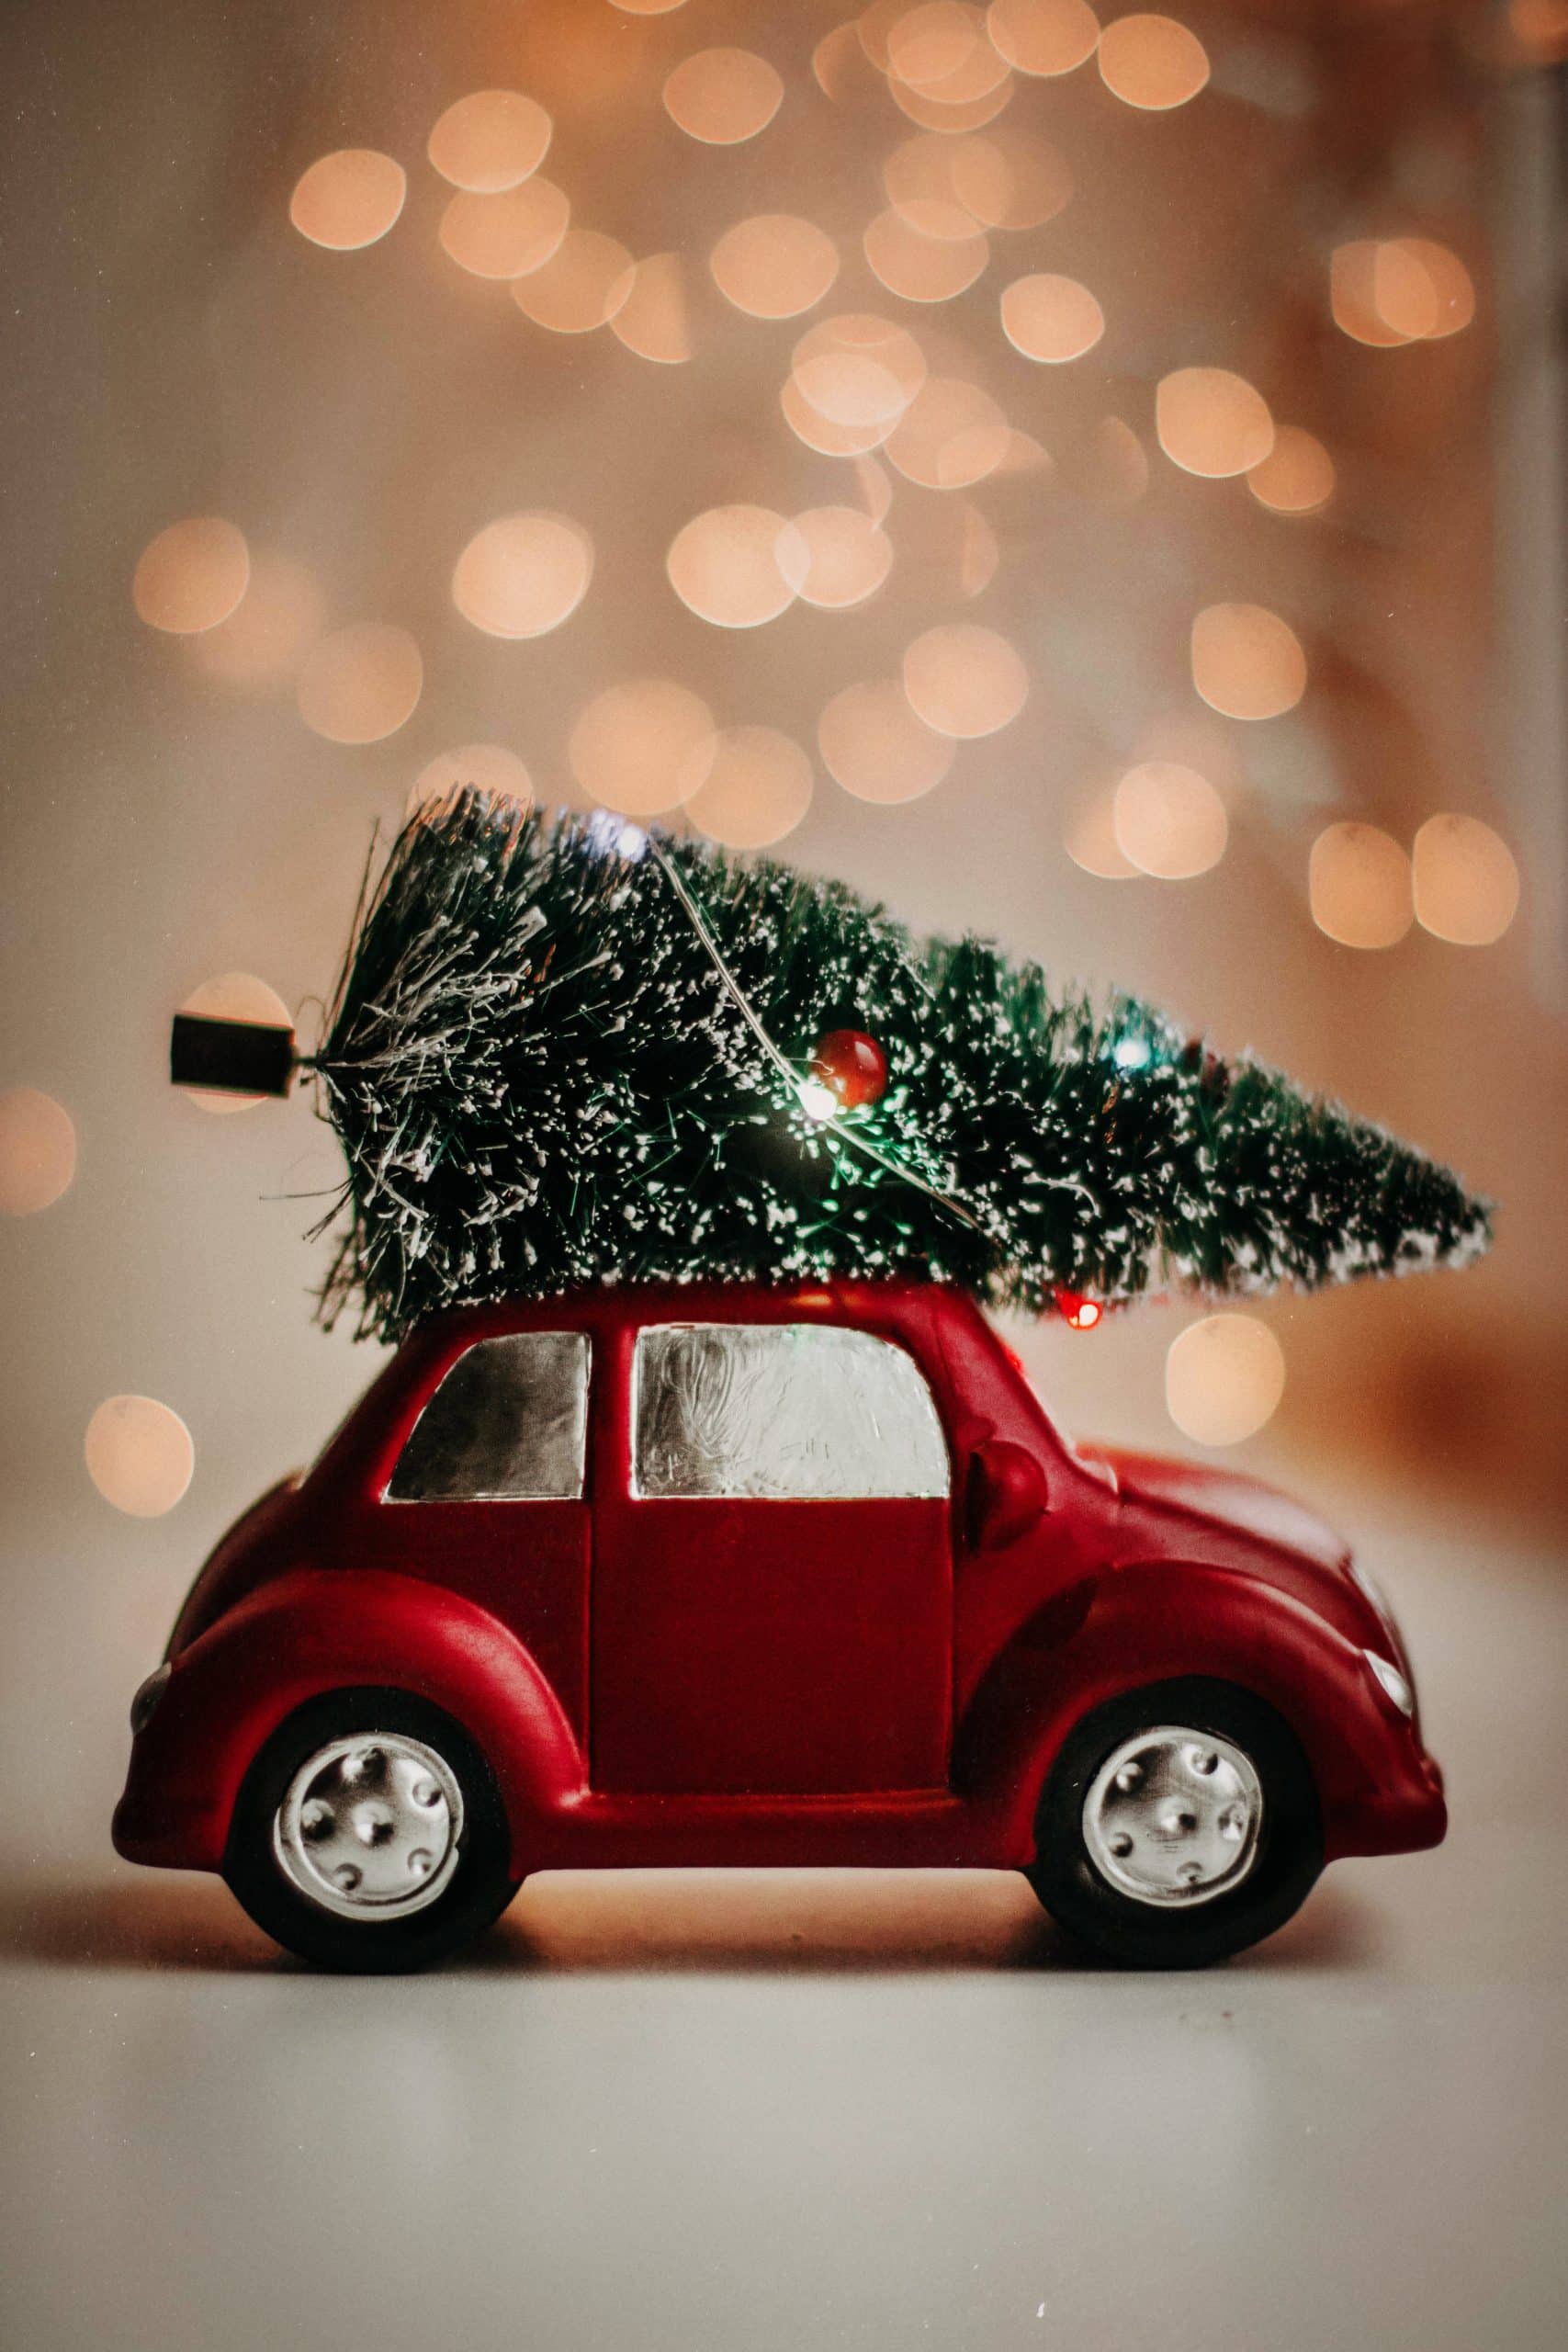 A small red toy car with a christmas tree on top